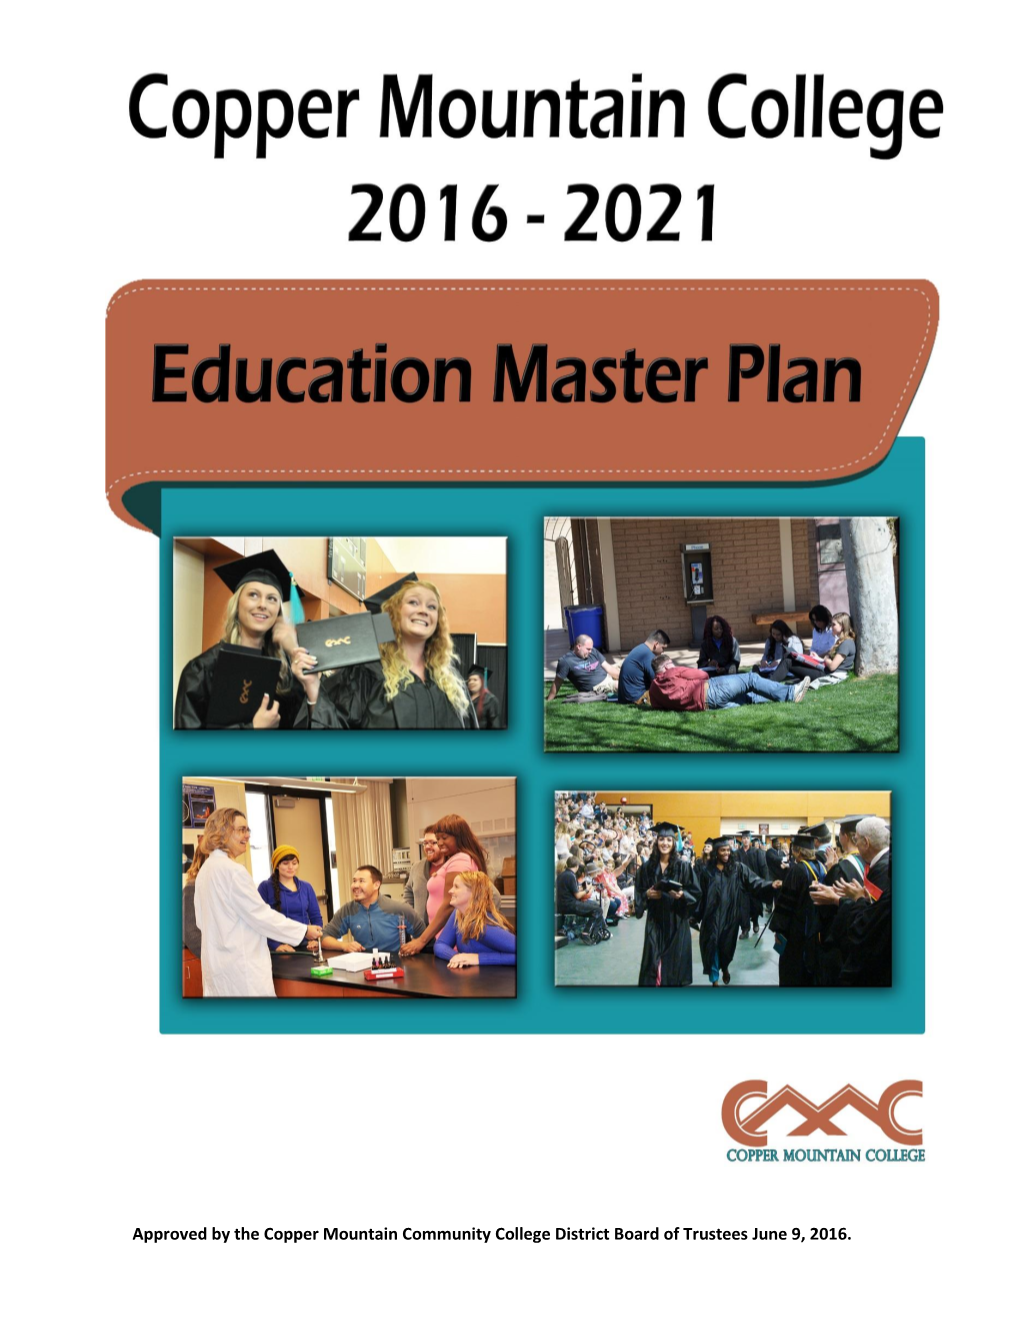 Approved by the Copper Mountain Community College District Board of Trustees June 9, 2016